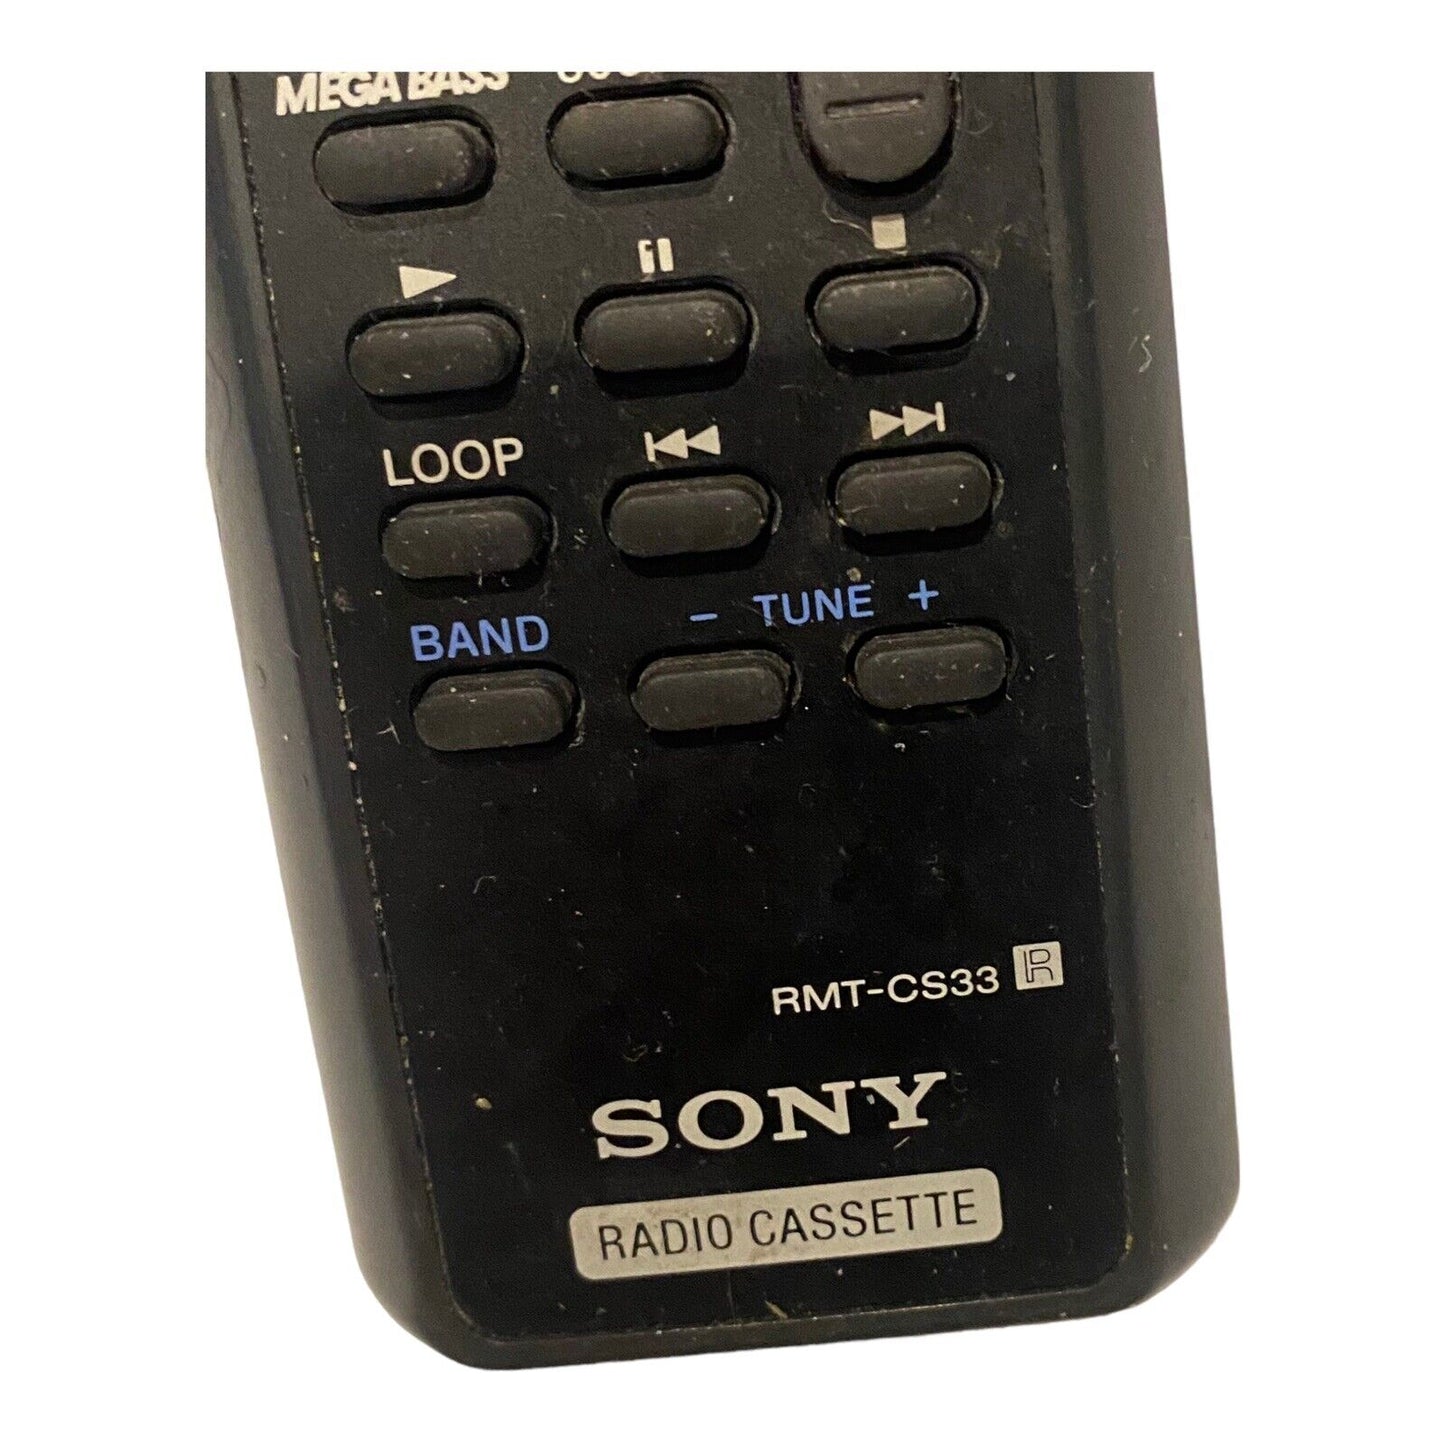 Original SONY RMT-CS33 Remote Control for CD BOOMBOX CFD-S34 CFD-S37